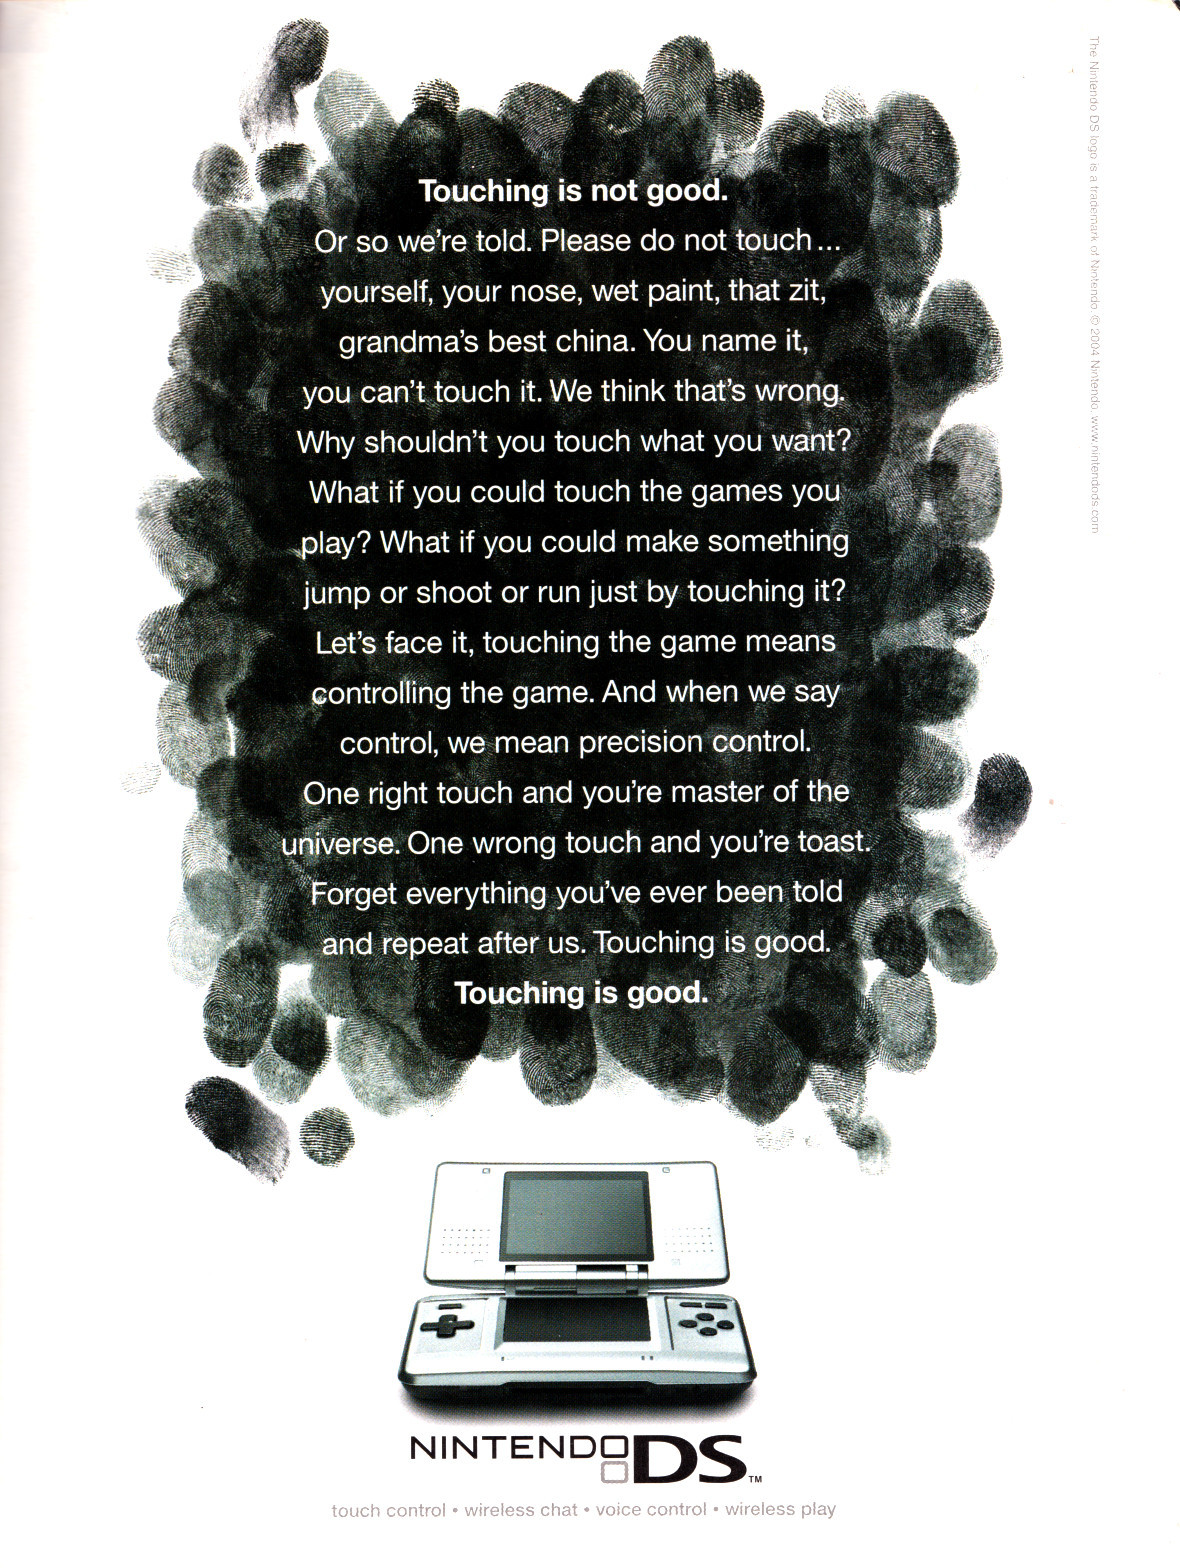 Nintendo DS campaign with slogan 'Touching is Good'.